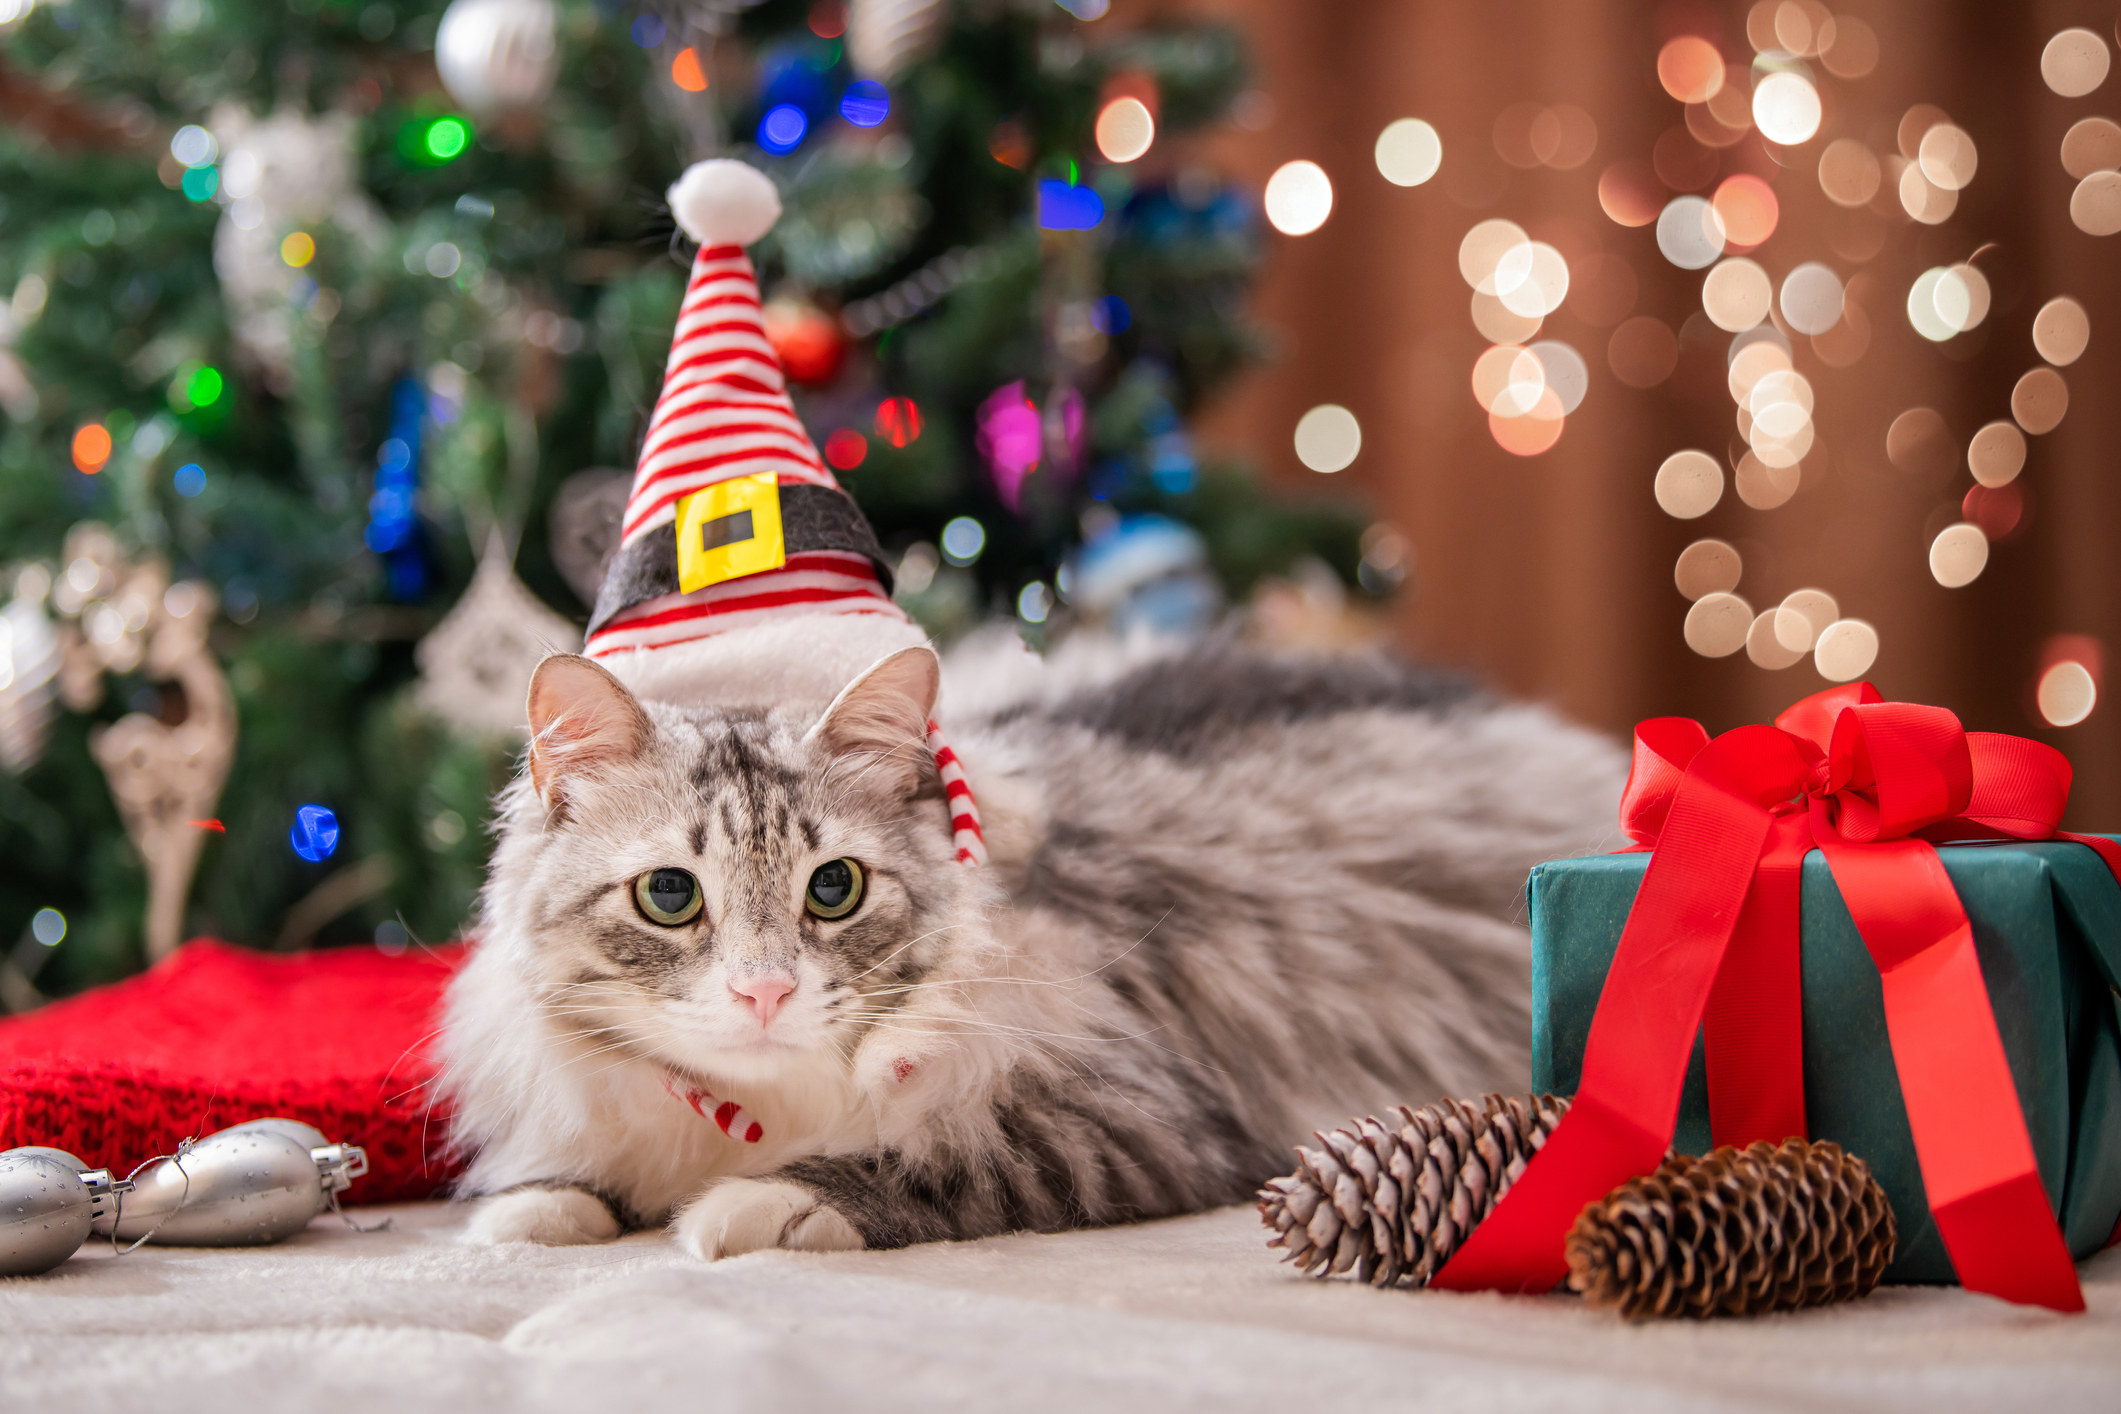 fat fluffy cat next to a gift box on the background of a christmas tree and lights of garlands